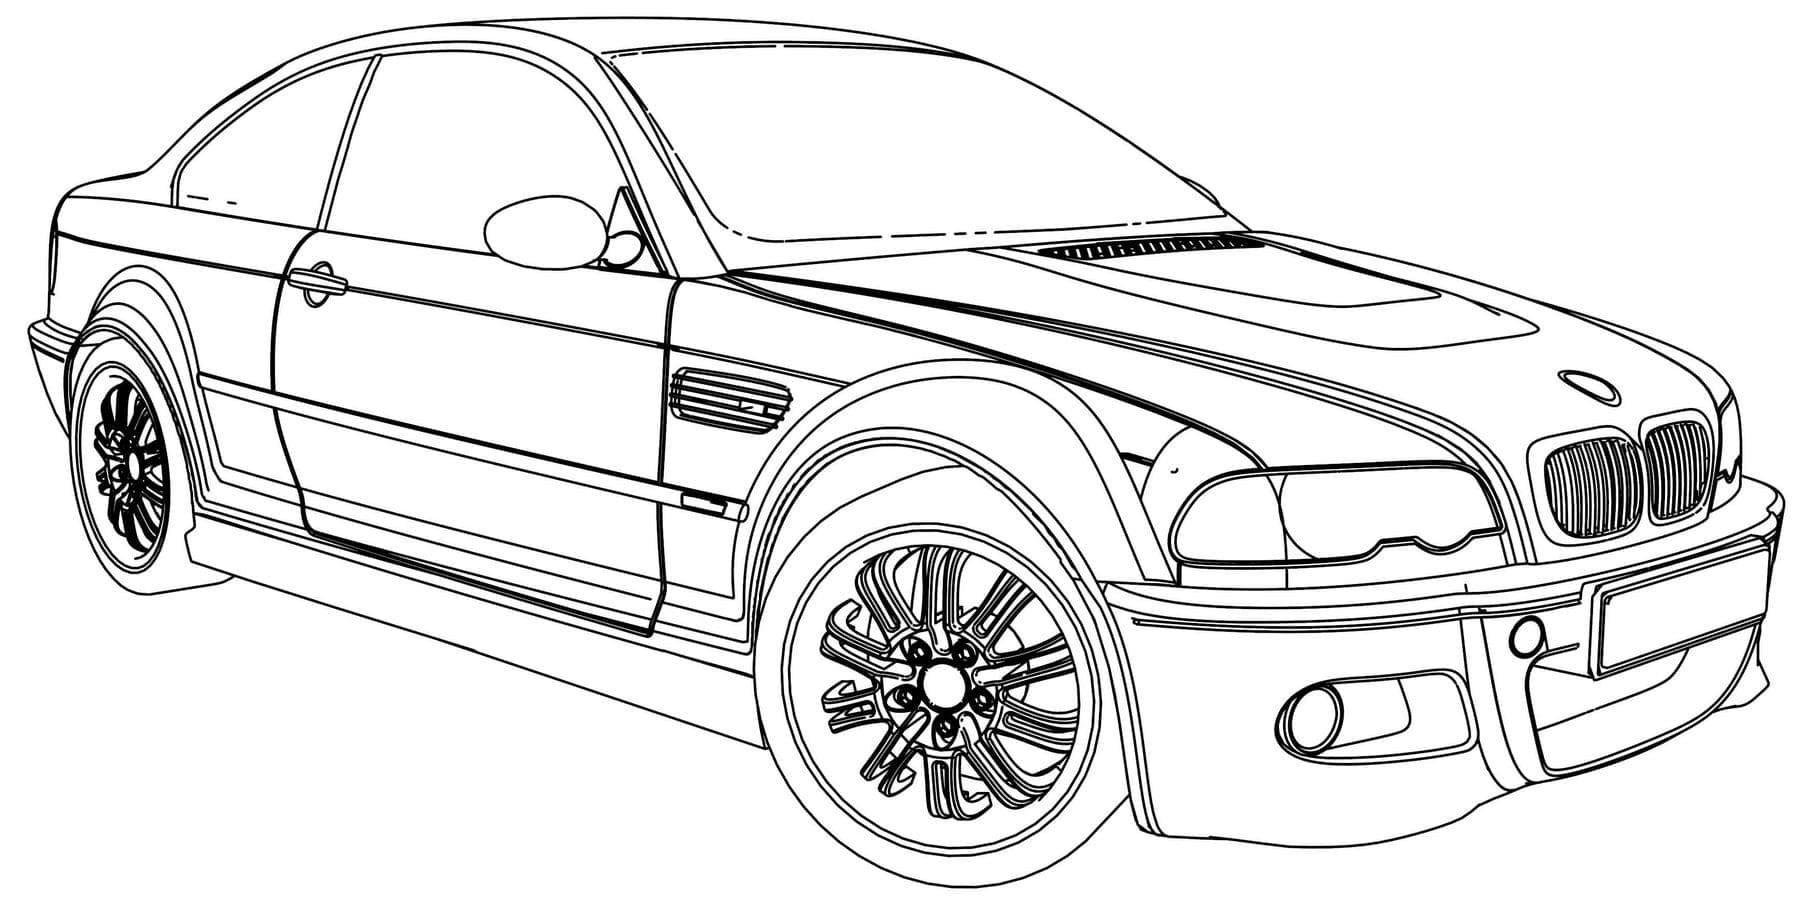 racing cars coloring pages kids bmw m3